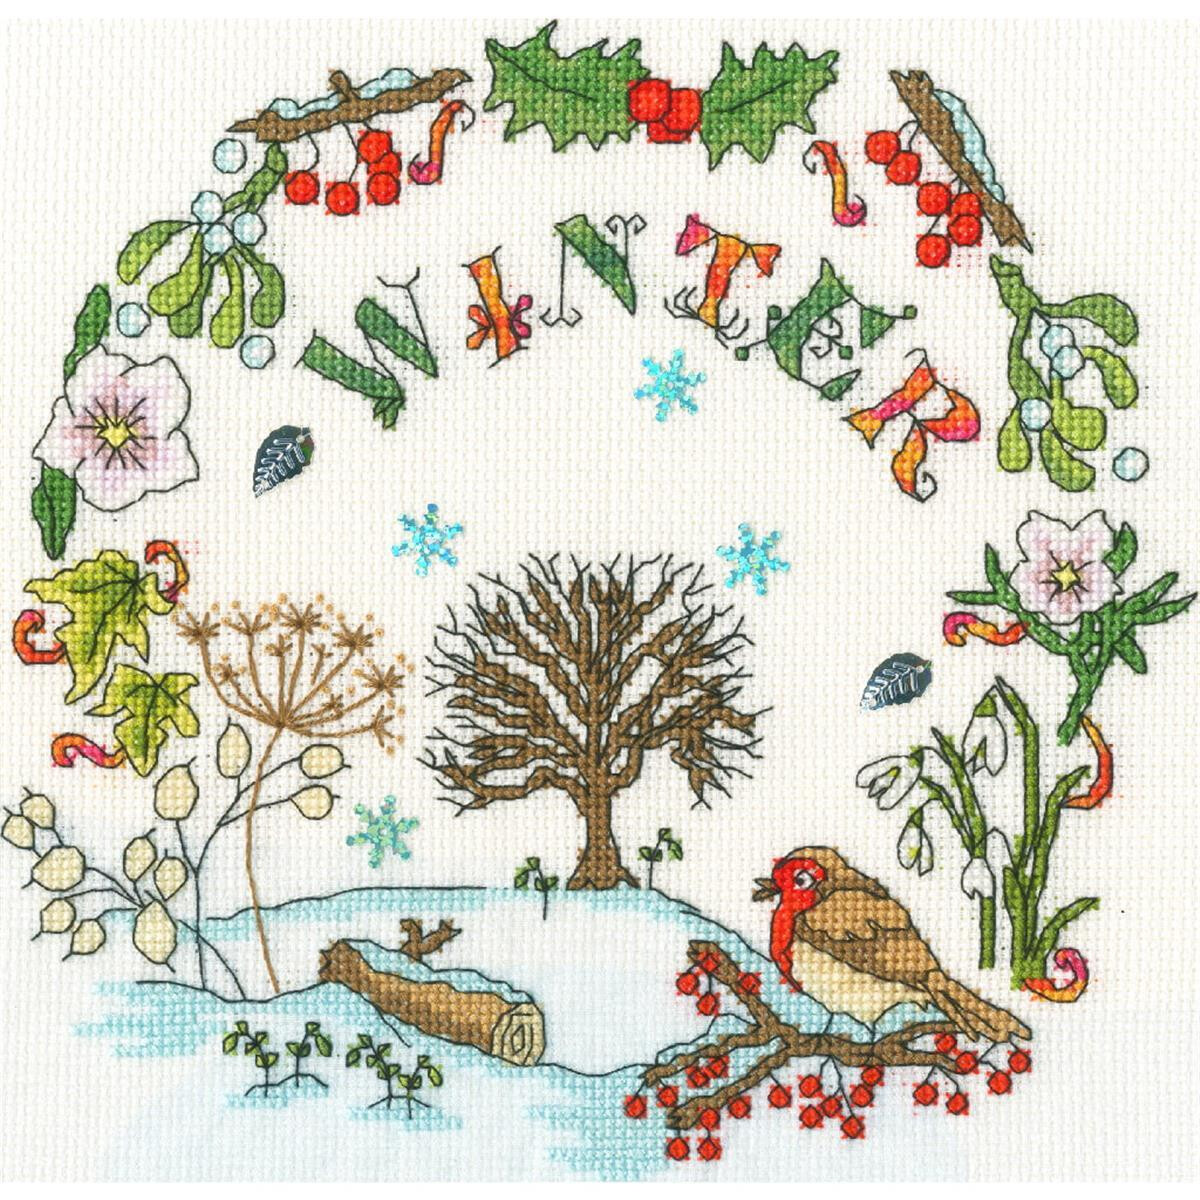 A cross stitch pattern or embroidery picture with a...